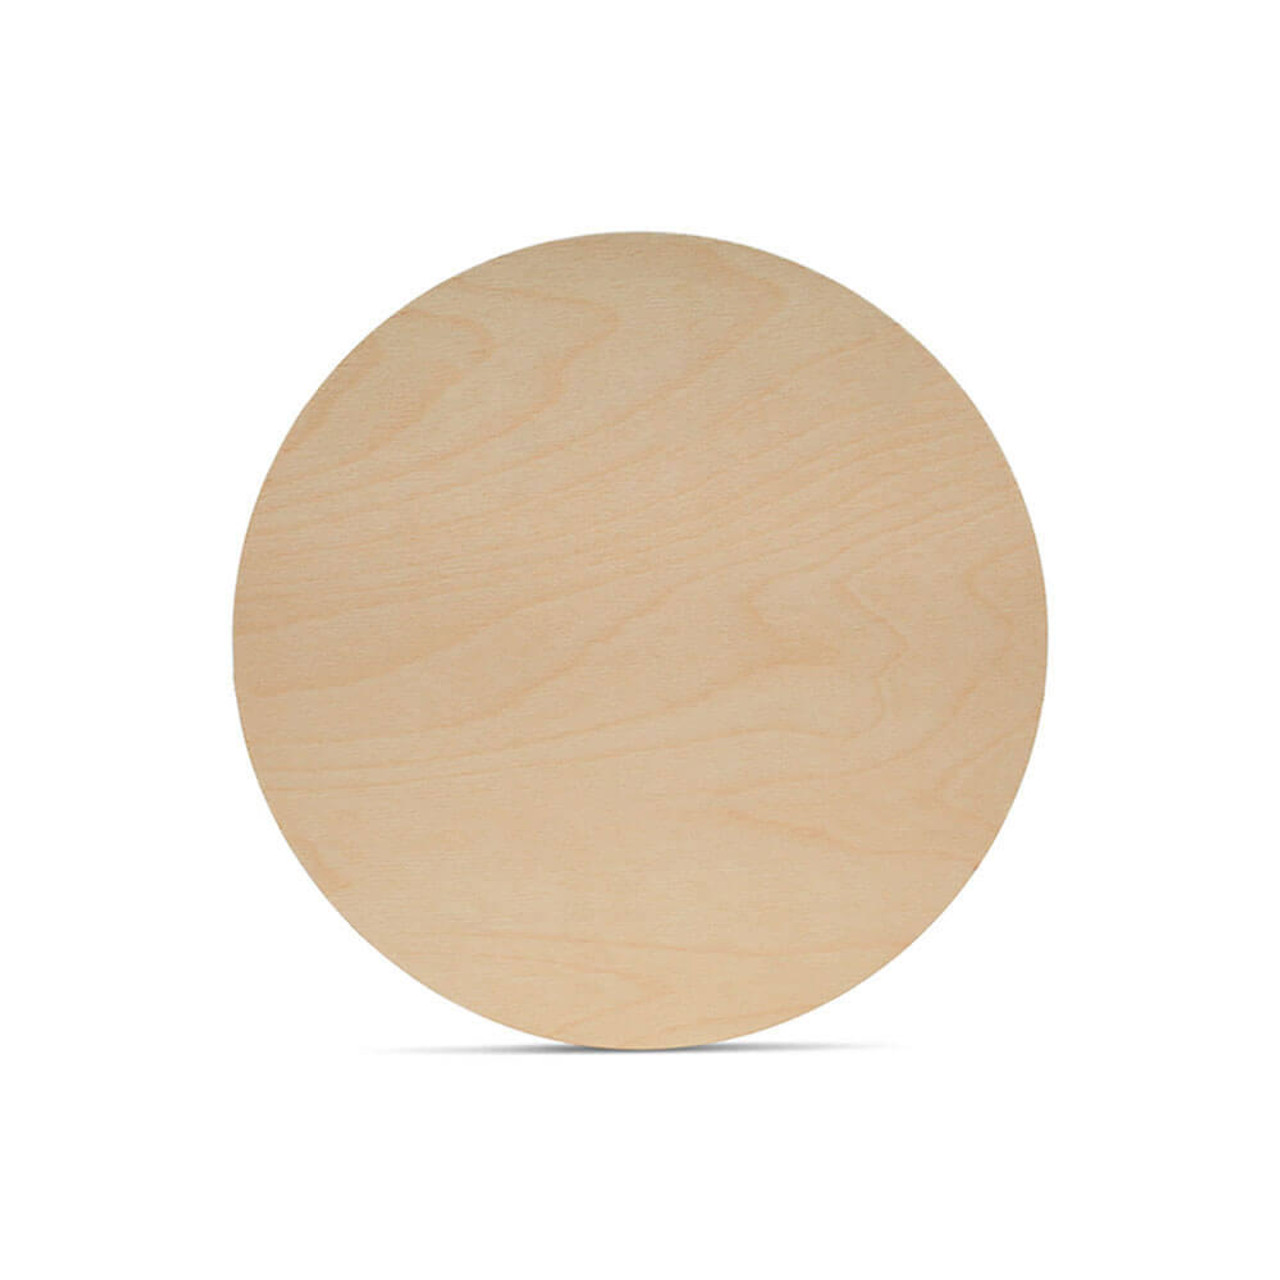 Wood Circles 18 inch, 3 Thicknesses, Unfinished Birch Sign Plaques | Woodpeckers | 1/2 Thick | Michaels